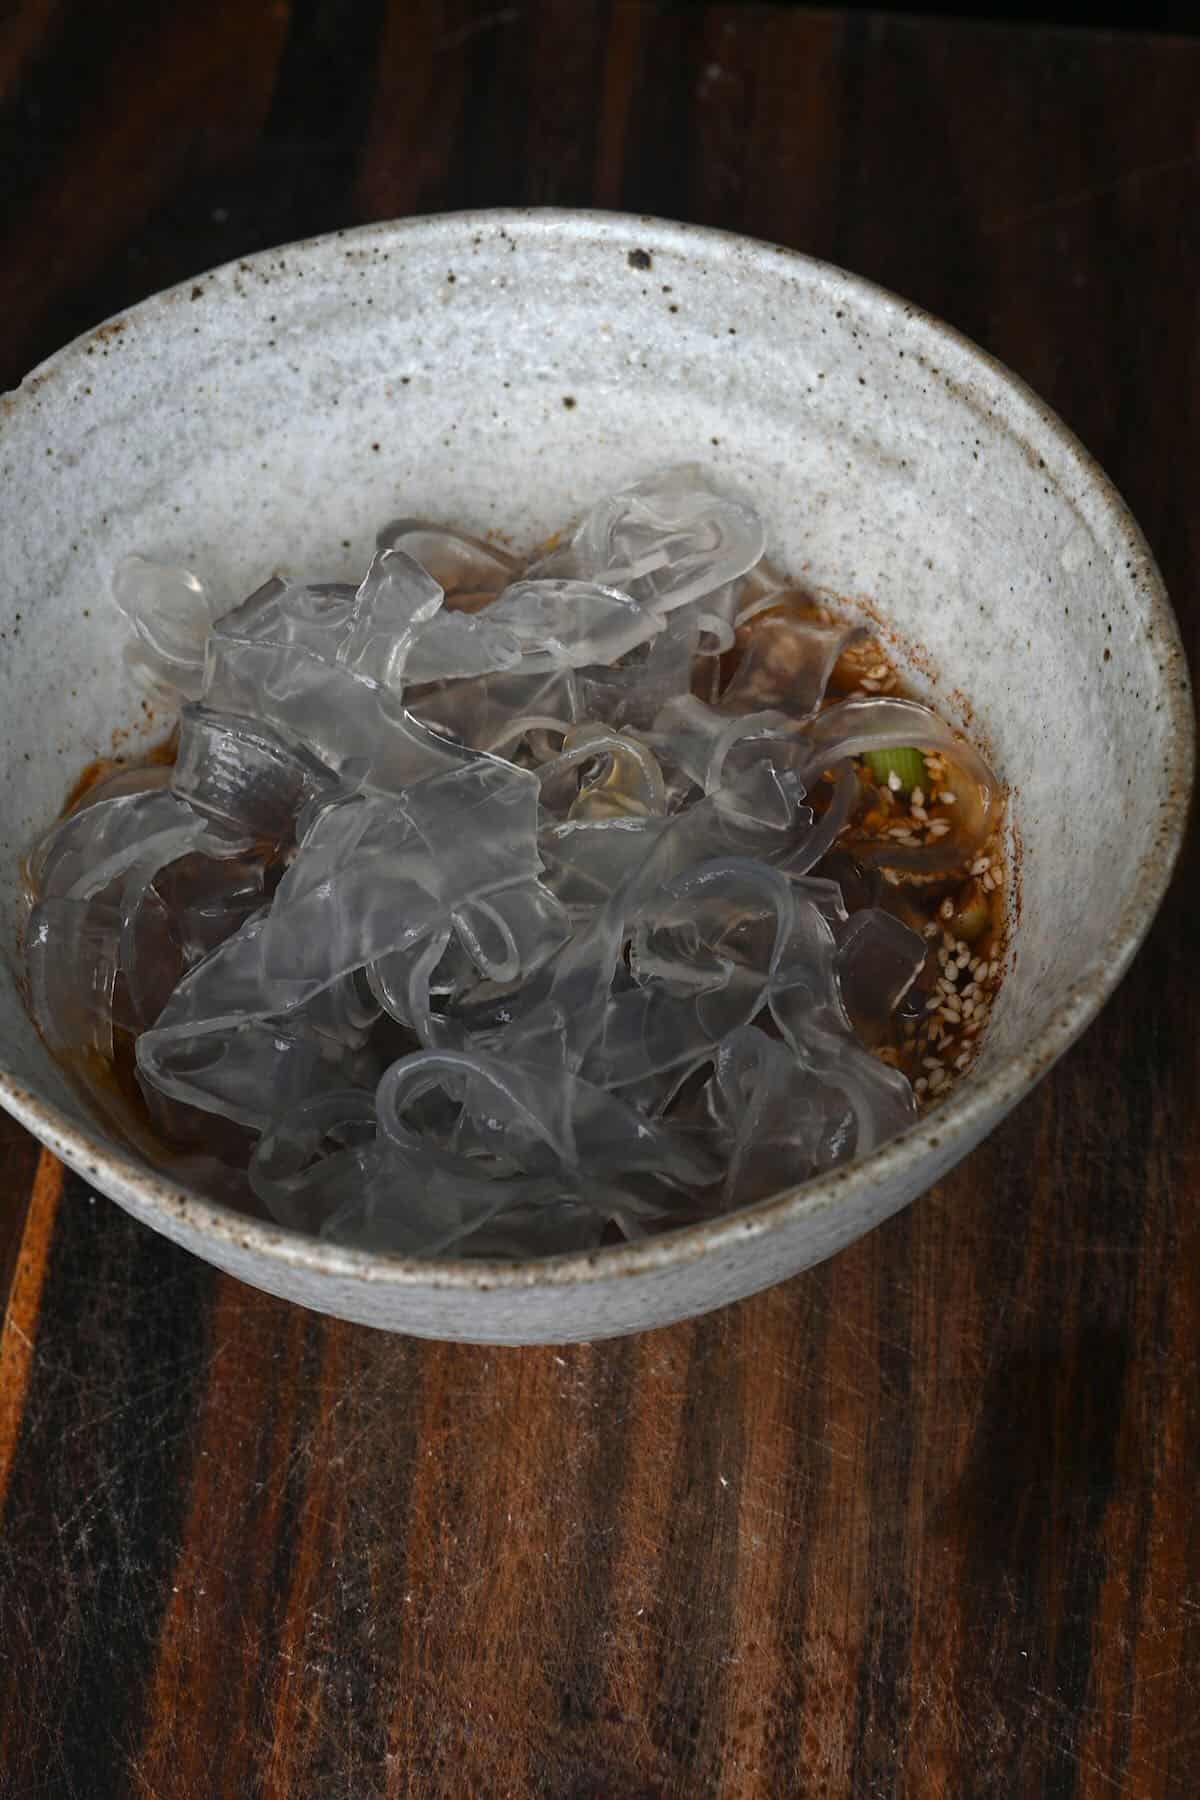 A bowl with cooked noodles over chili oil